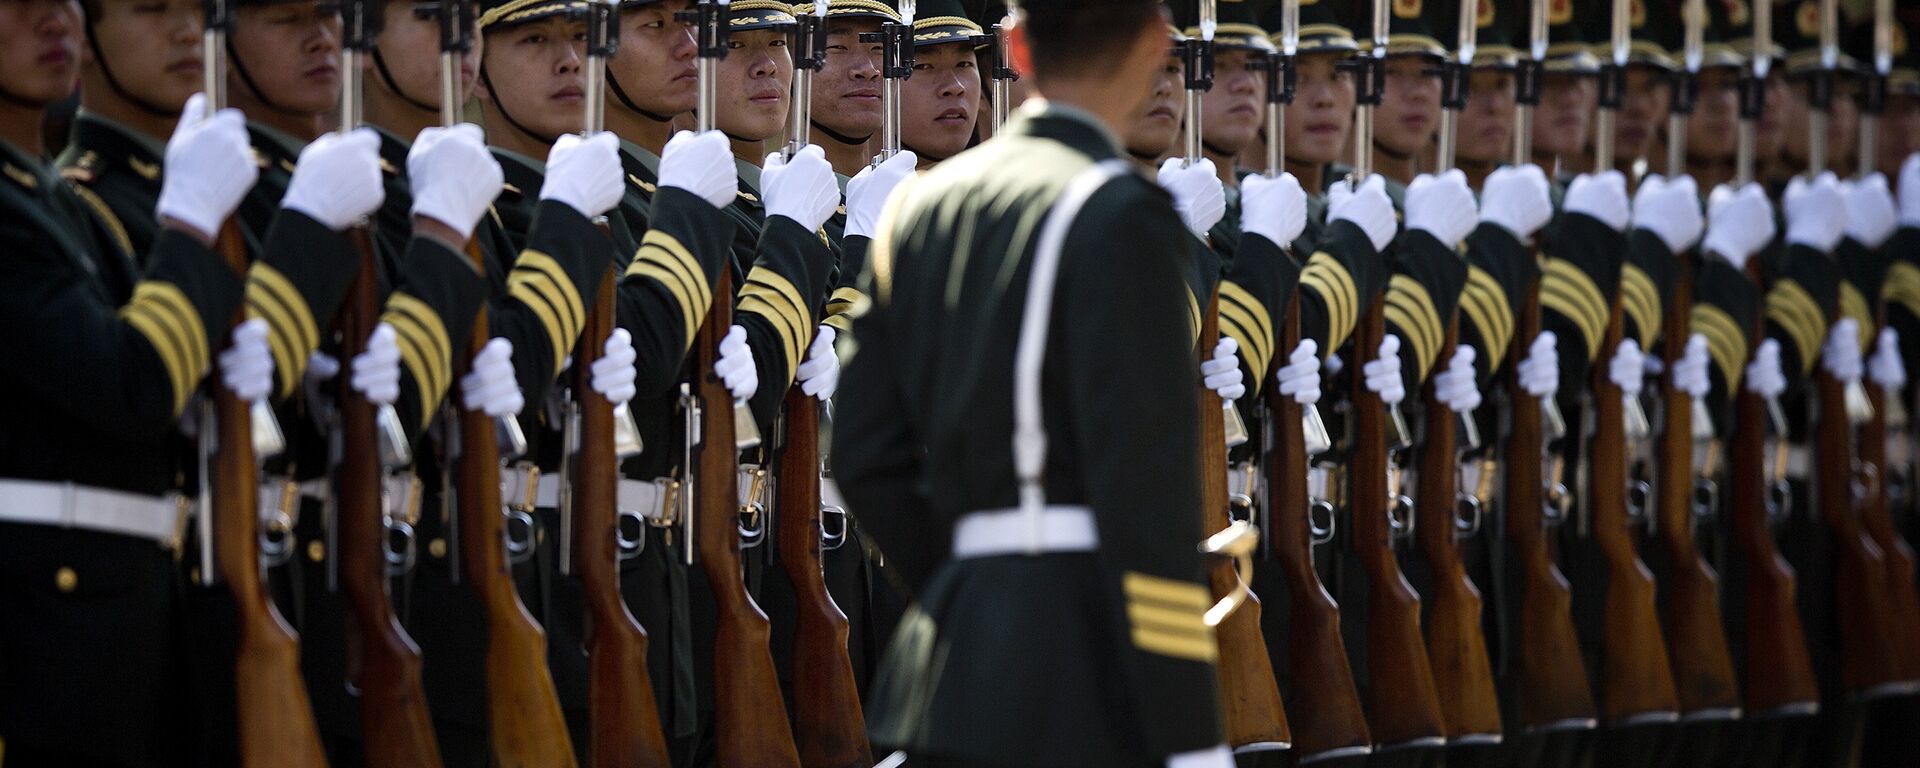 A Chinese People's Liberation Army soldier watches the position of members of a guard of honor as they prepare for a welcome ceremony for a visiting dignitary. File photo. - Sputnik International, 1920, 08.08.2022